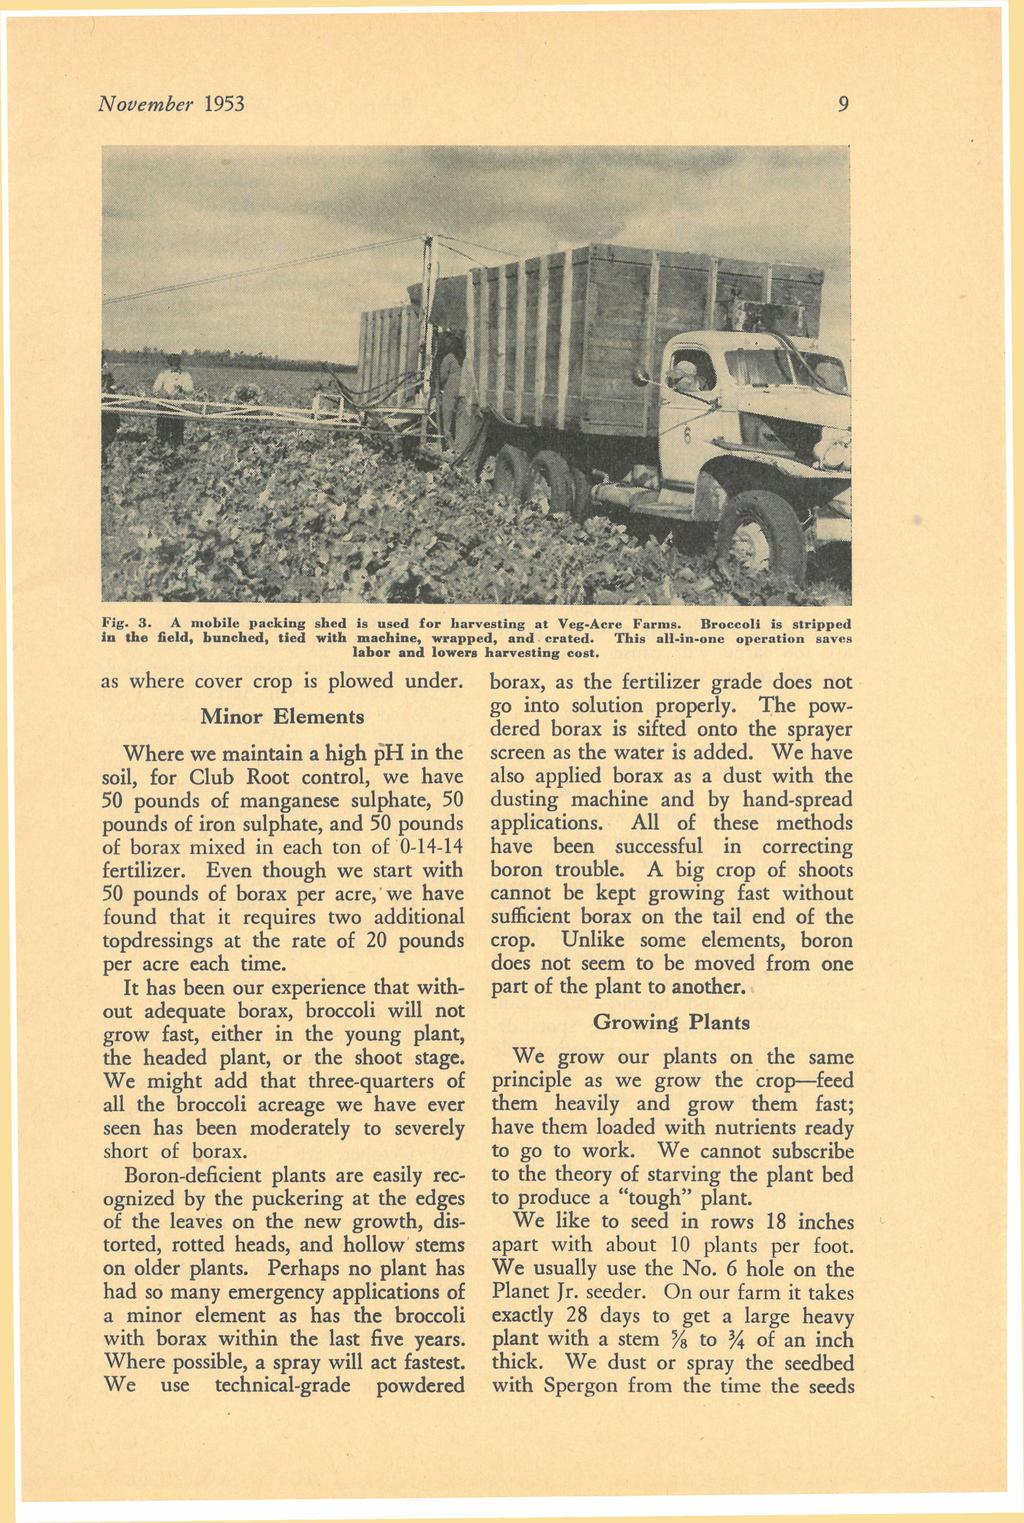 9 November 1953 Fig. 3. A mobile packing shed is used for harvesting at Veg-Acre Farms. Broccoli is stripped in the field, bunched, tied with machine, wrapped, and crated.